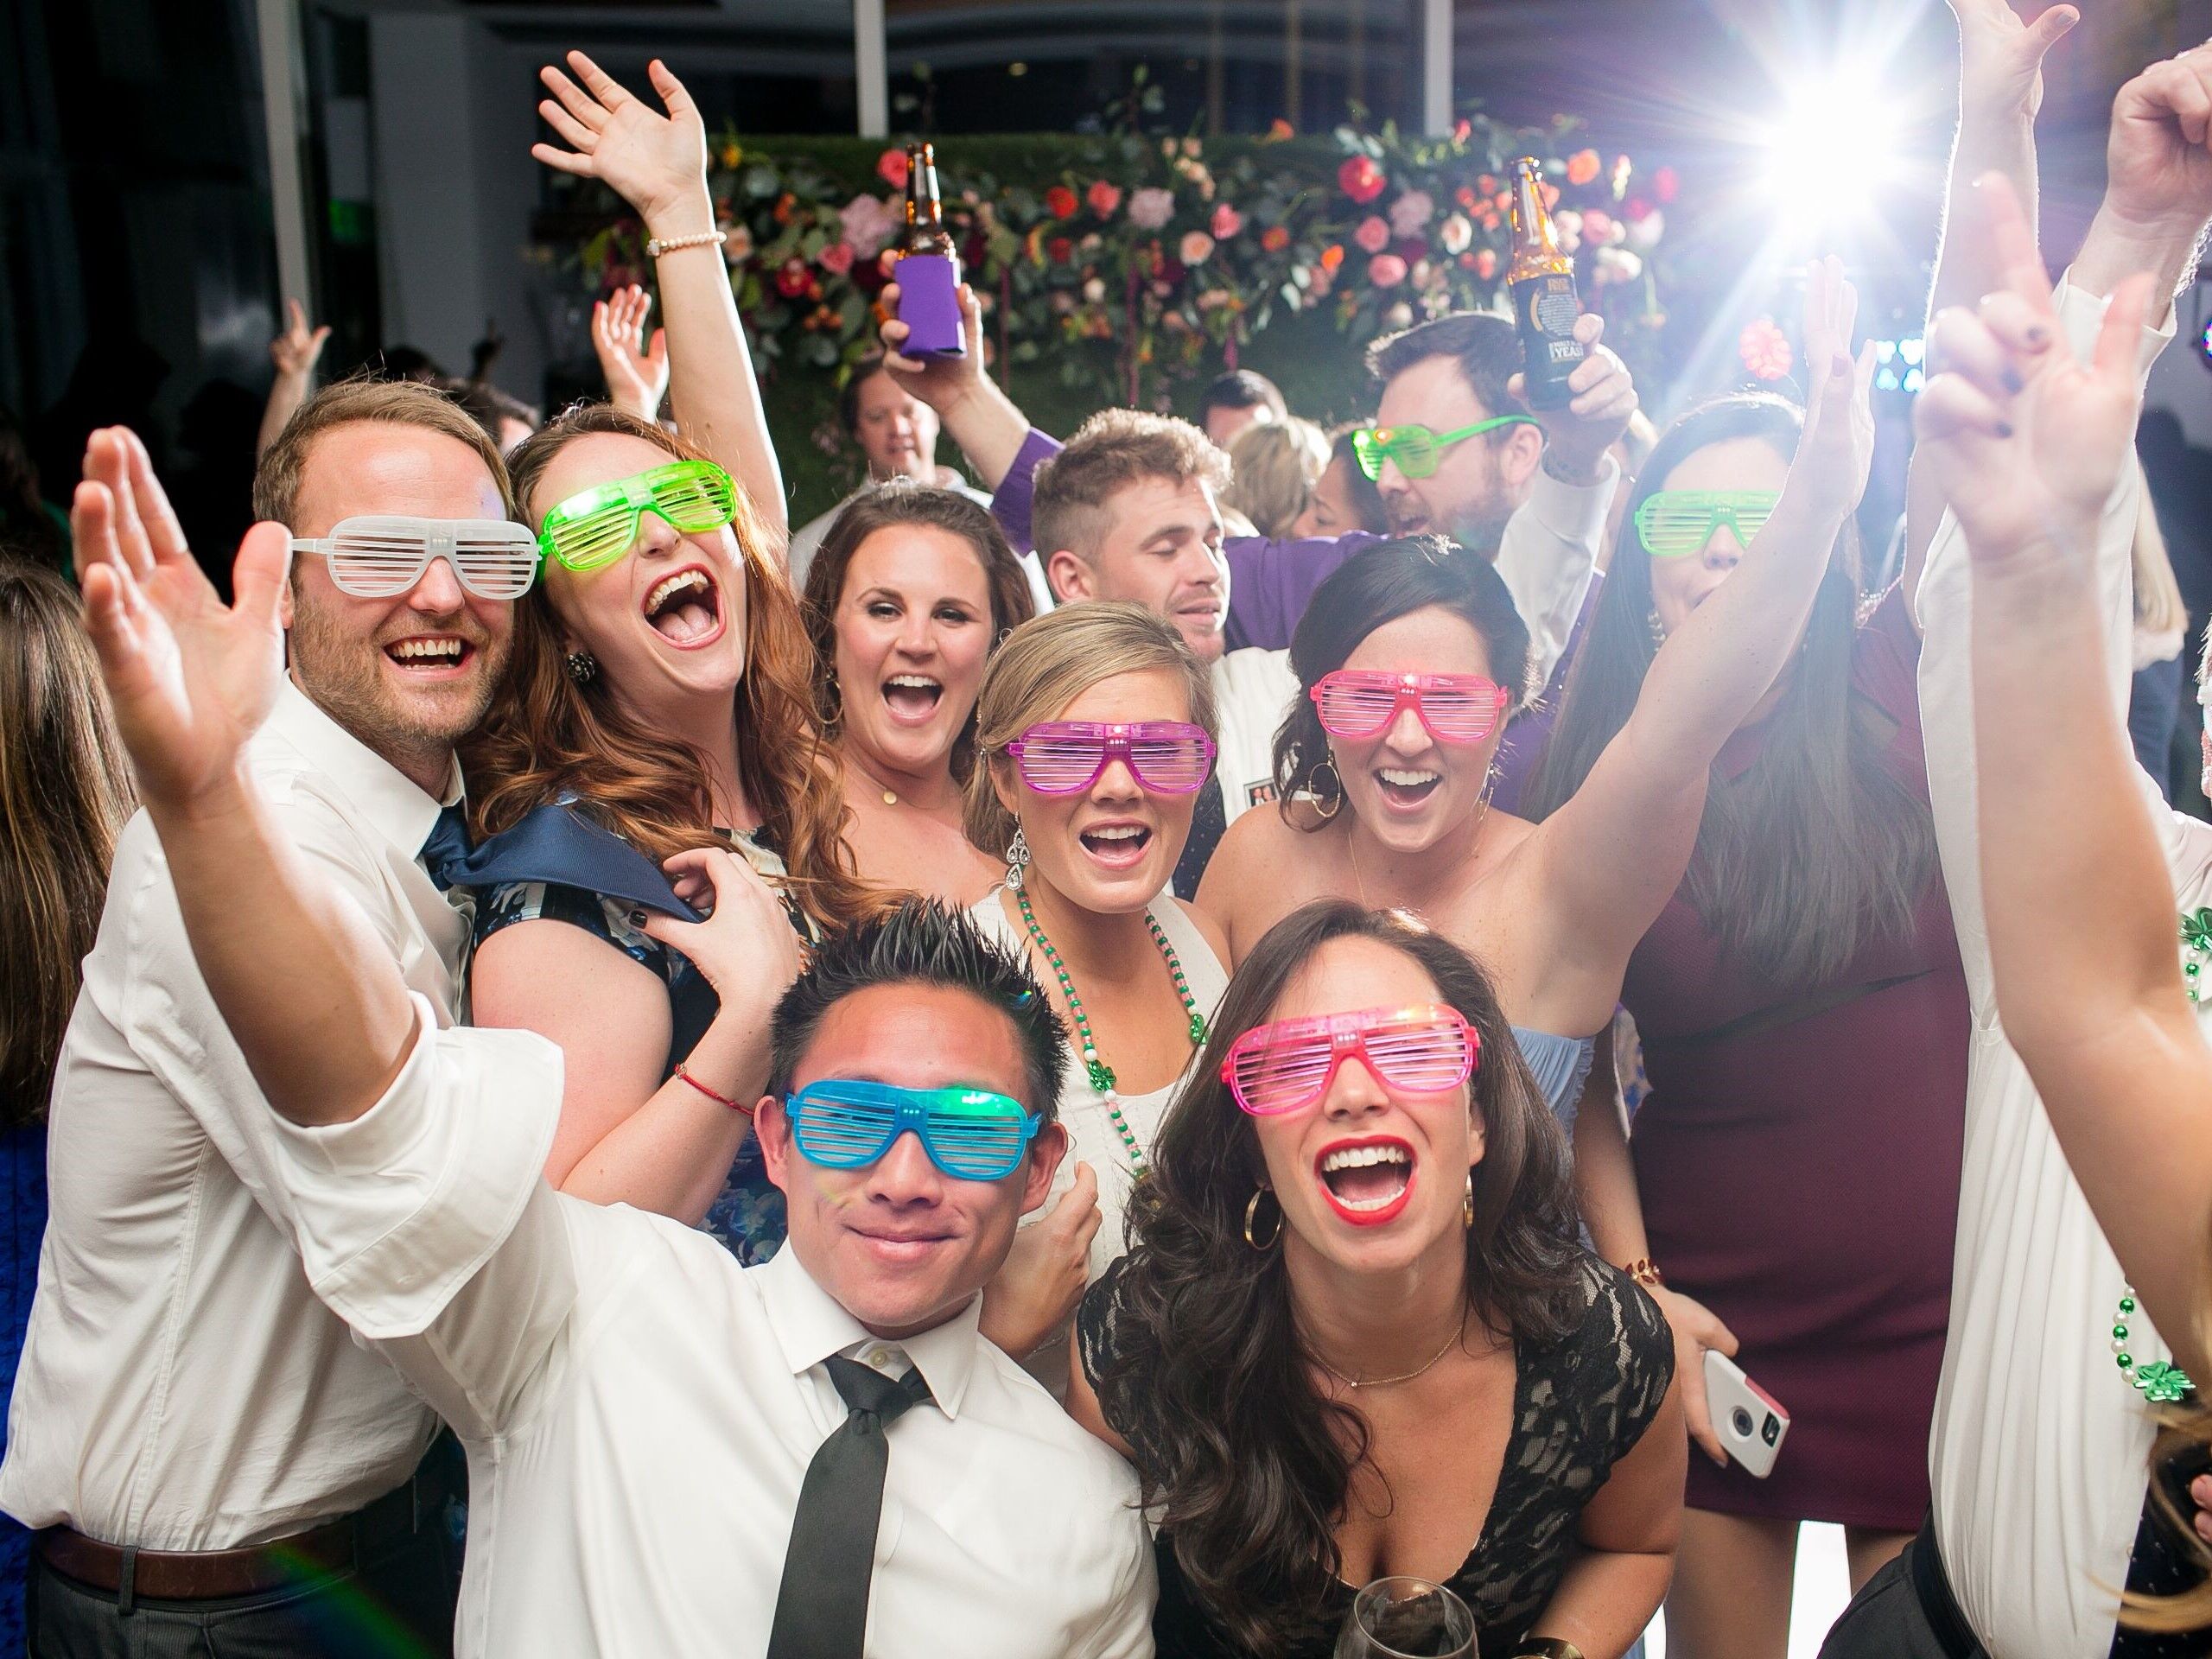 Wedding party posing for a funny picture wearing colorful glasses